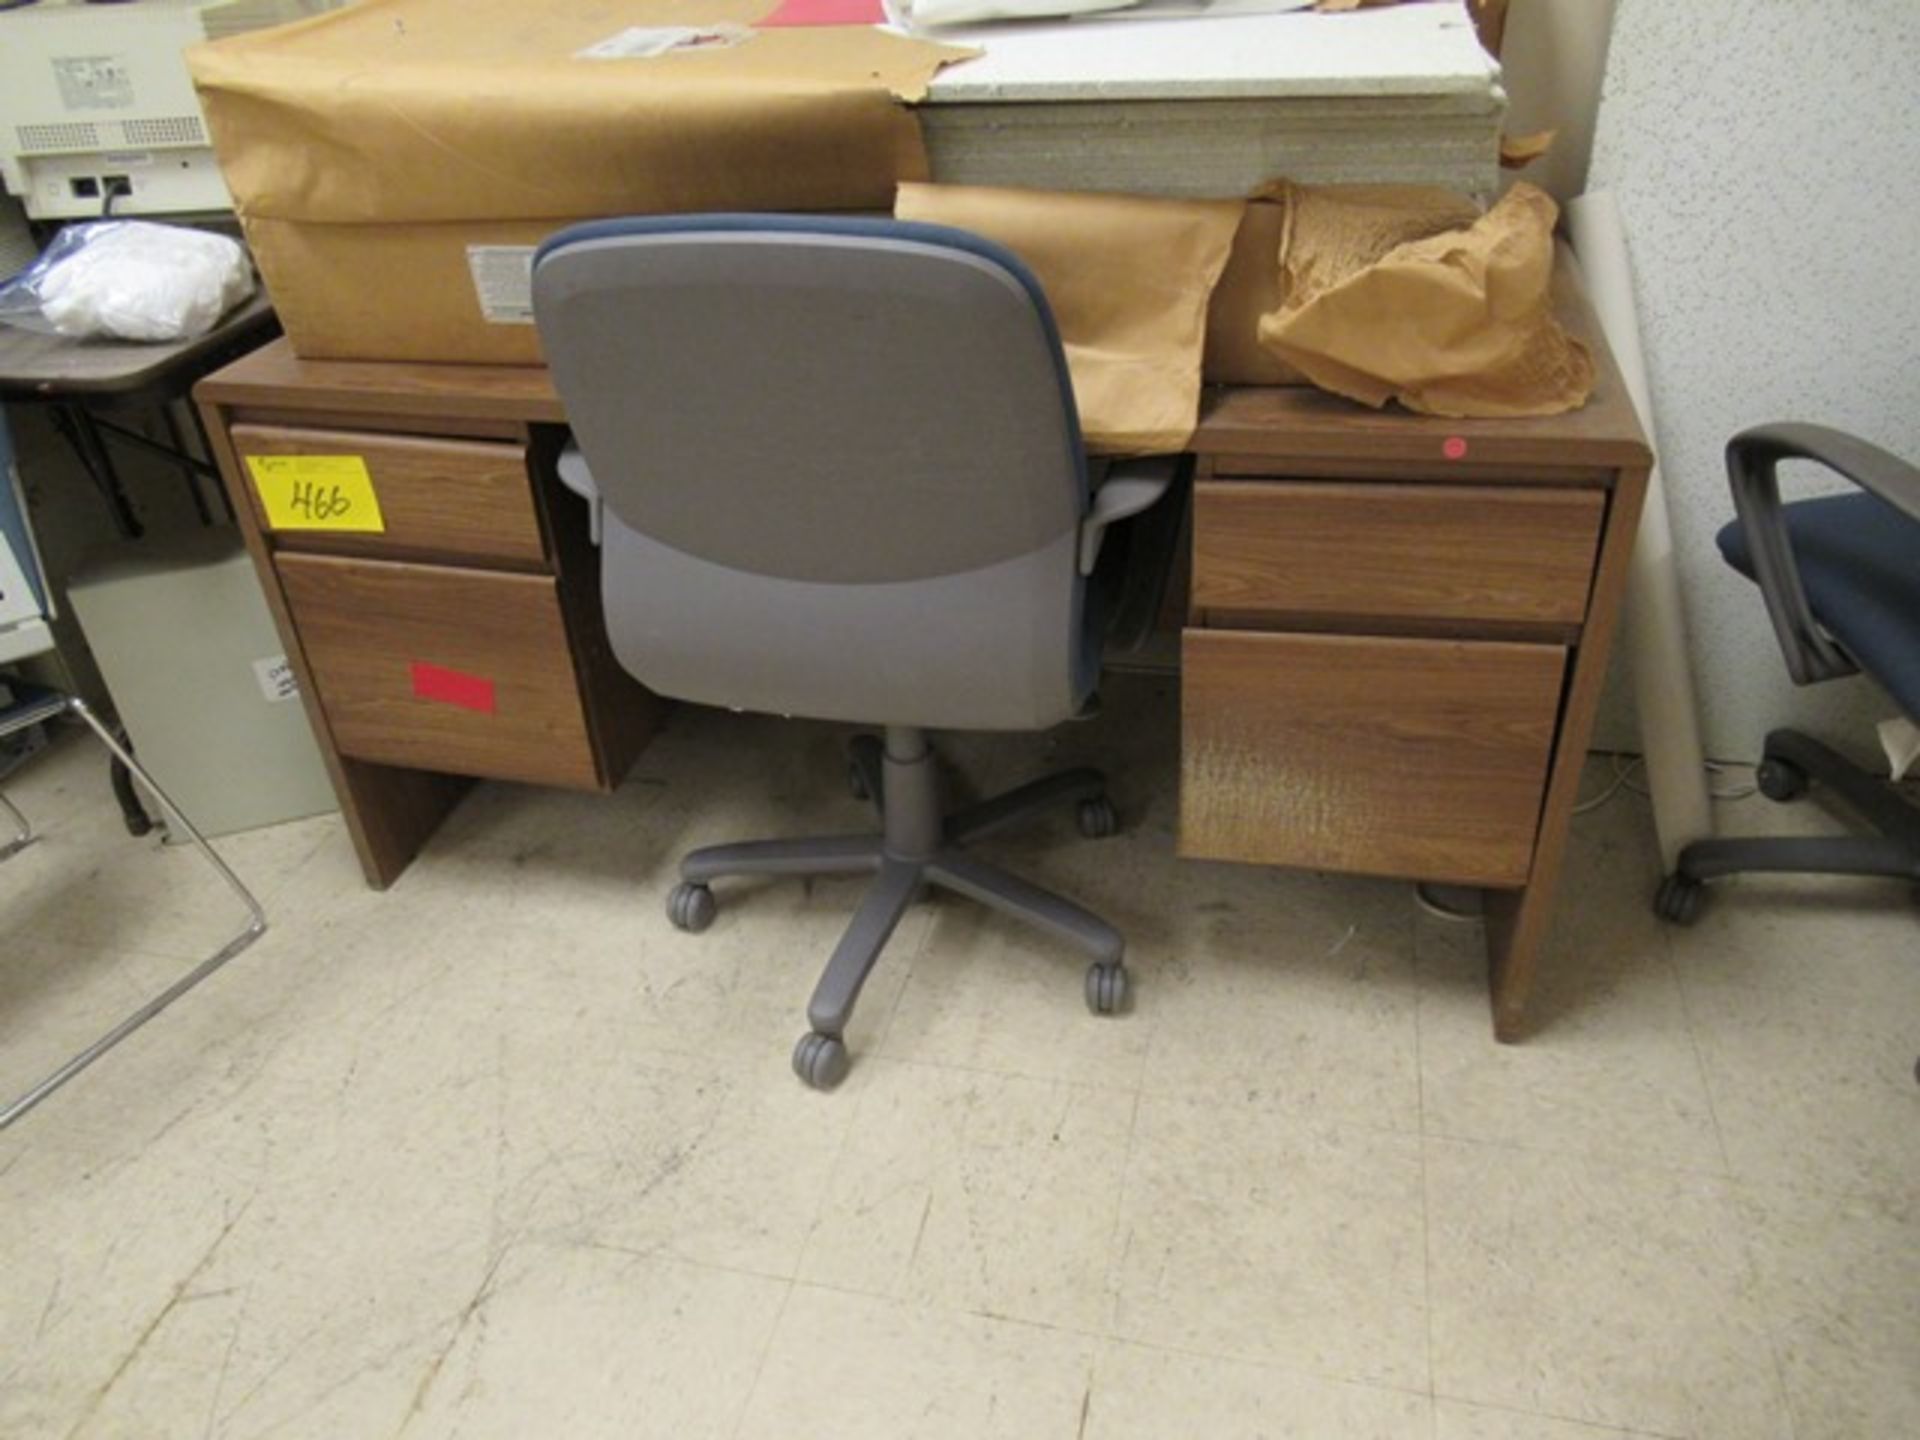 LOT ASST. OFFICE FURNITURE, BLUE PRINT COPIER, FILE CABINETS, CHAIRS, ETC. (MO2NDF) - Image 5 of 5